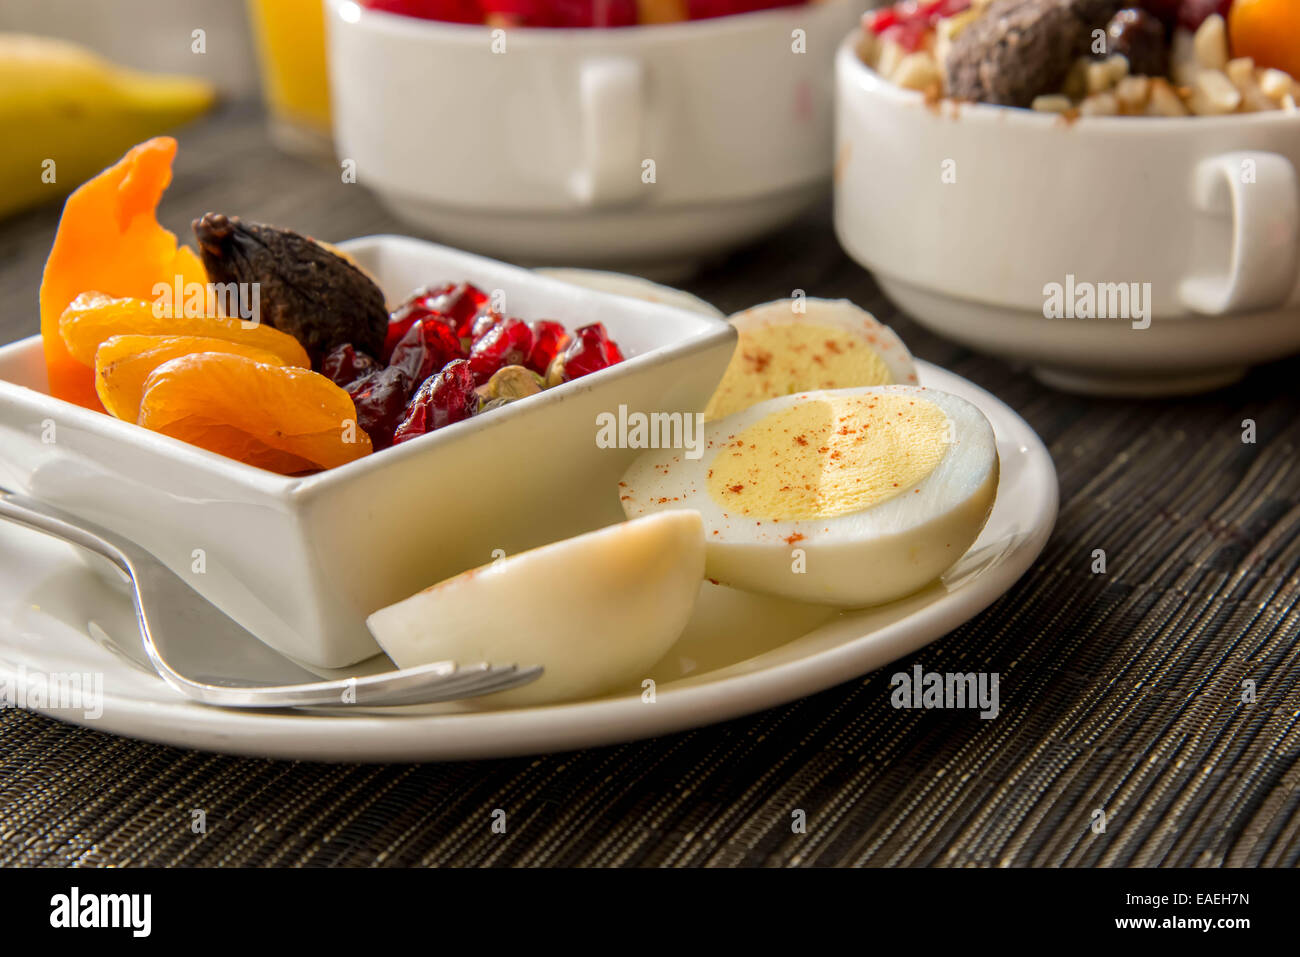 Fresh fruit and oatmeal with nuts and fruit toppings for breakfast Stock Photo